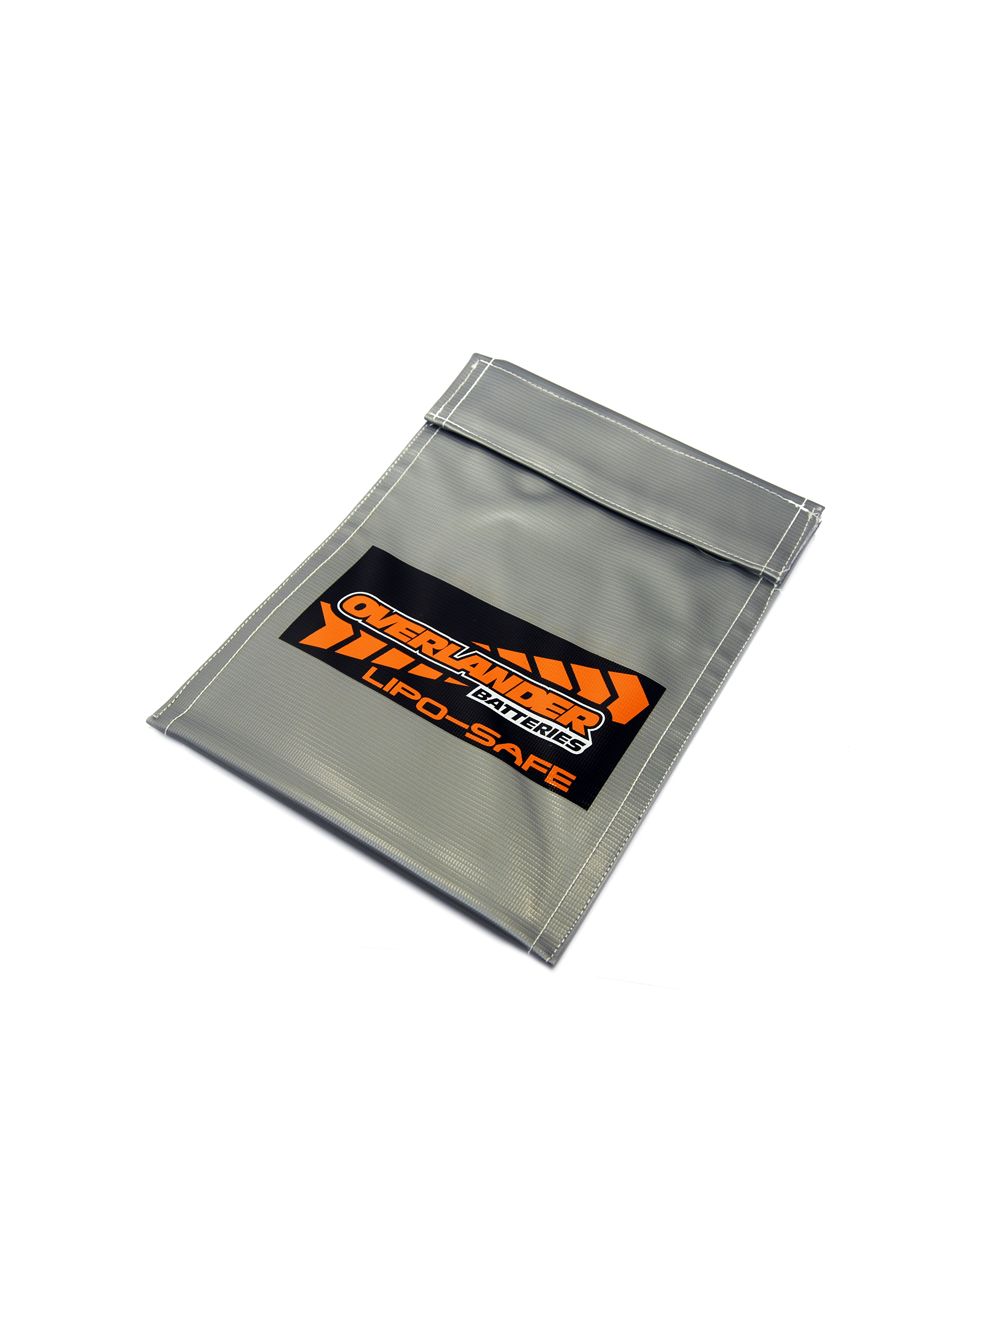 LIPO SAFETY CHARGE SACK 23x30cm